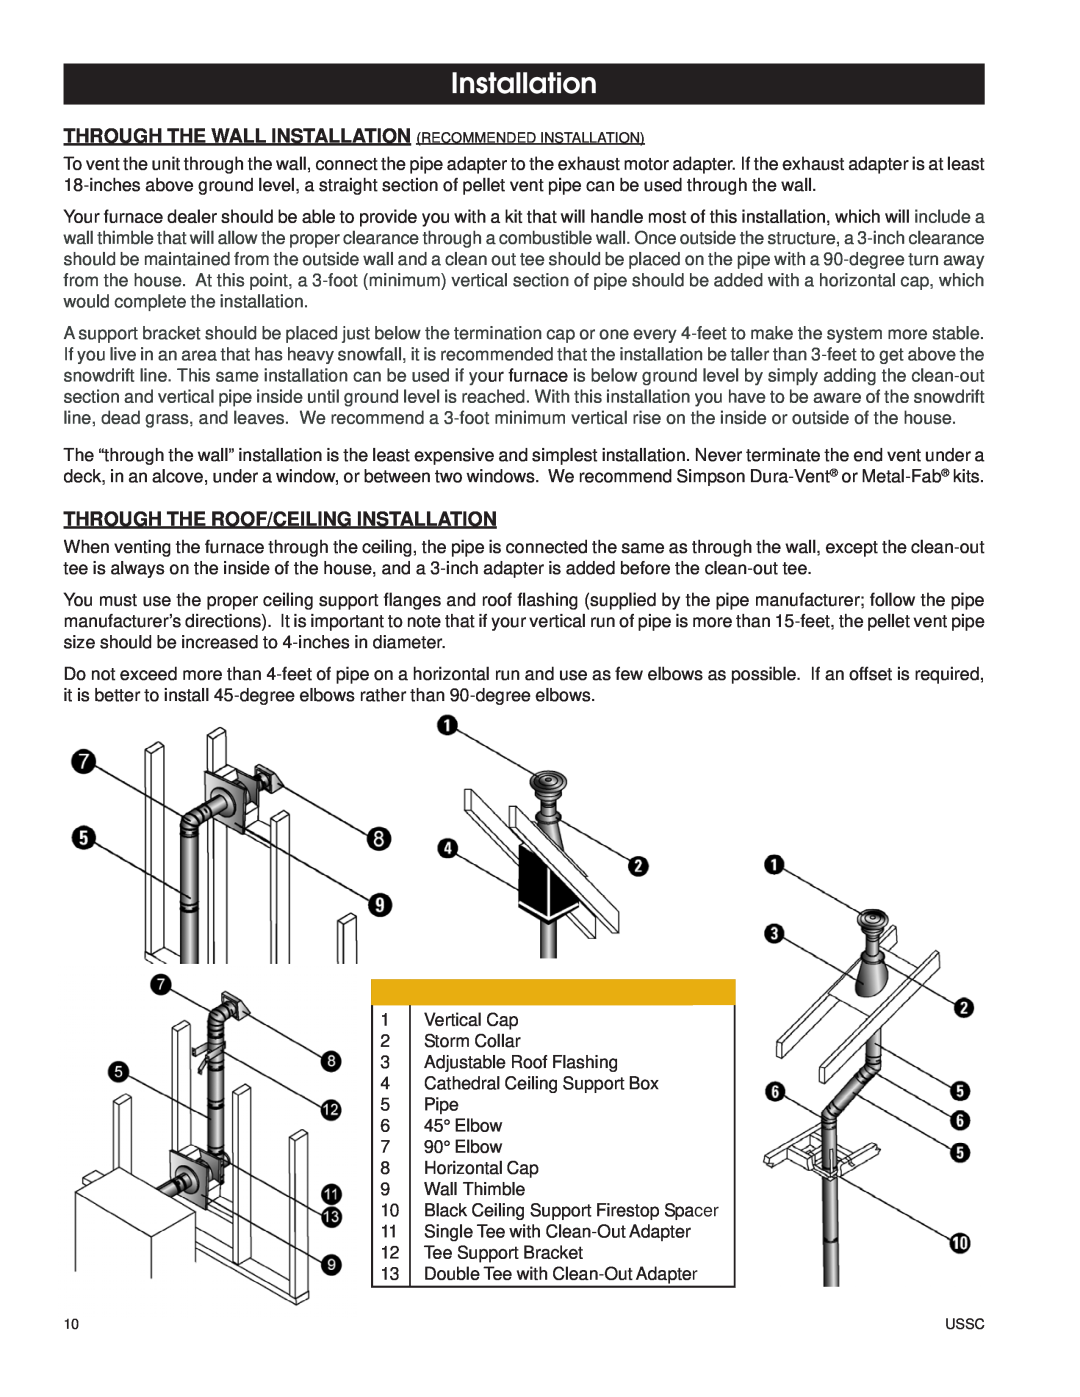 United States Stove 6110 owner manual Through The Roof/Ceiling Installation 